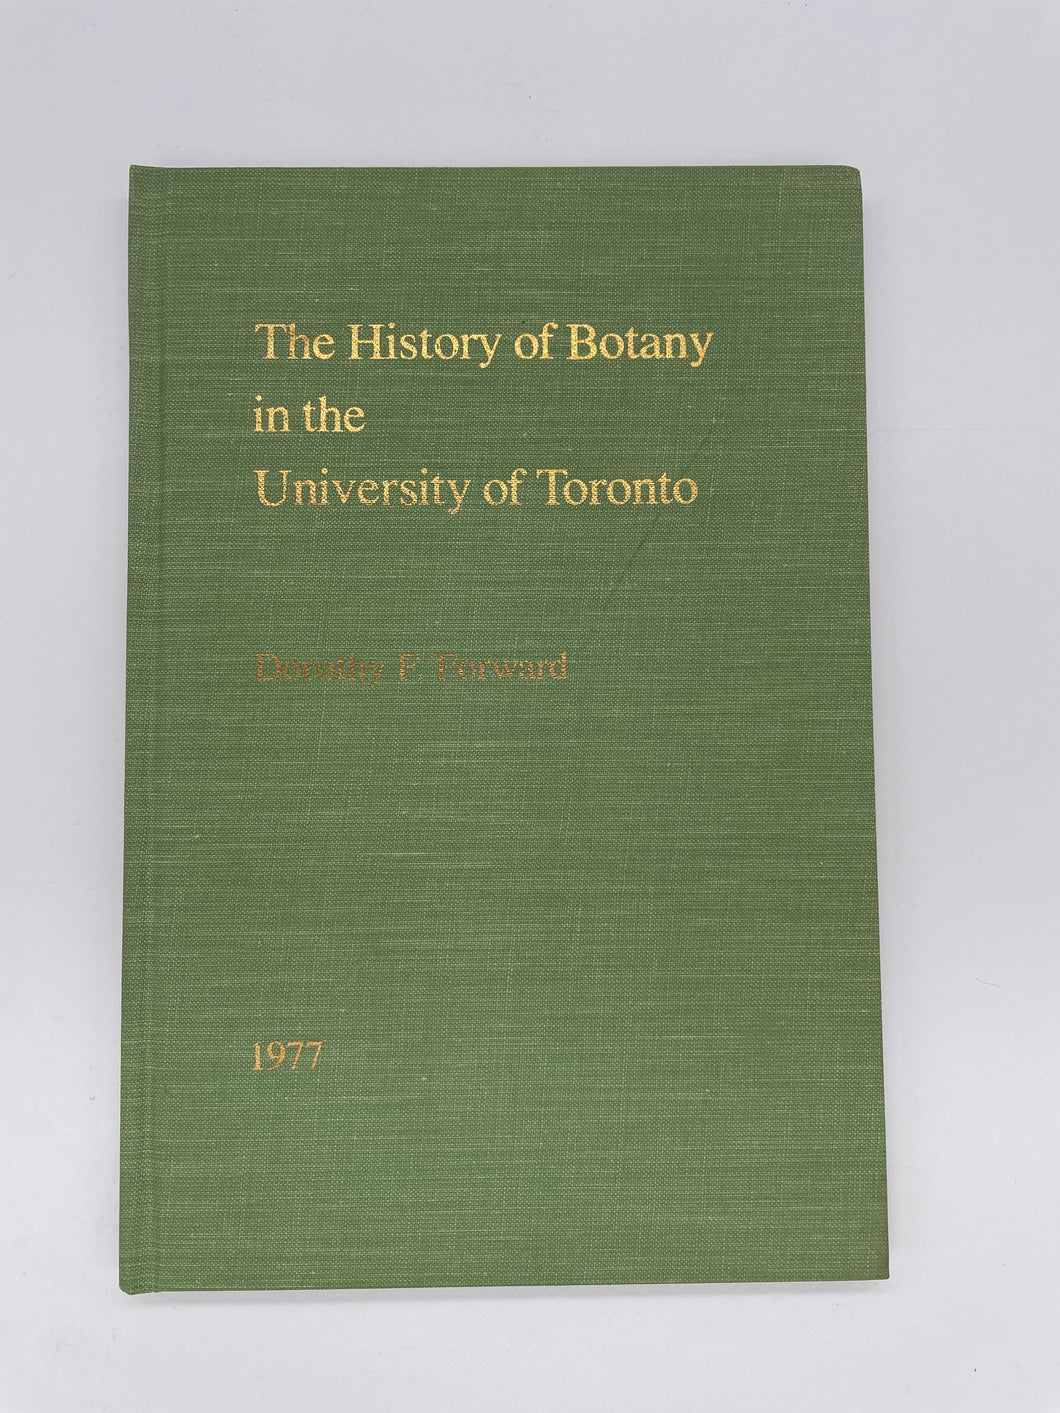 The History of Botany in the University of Toronto